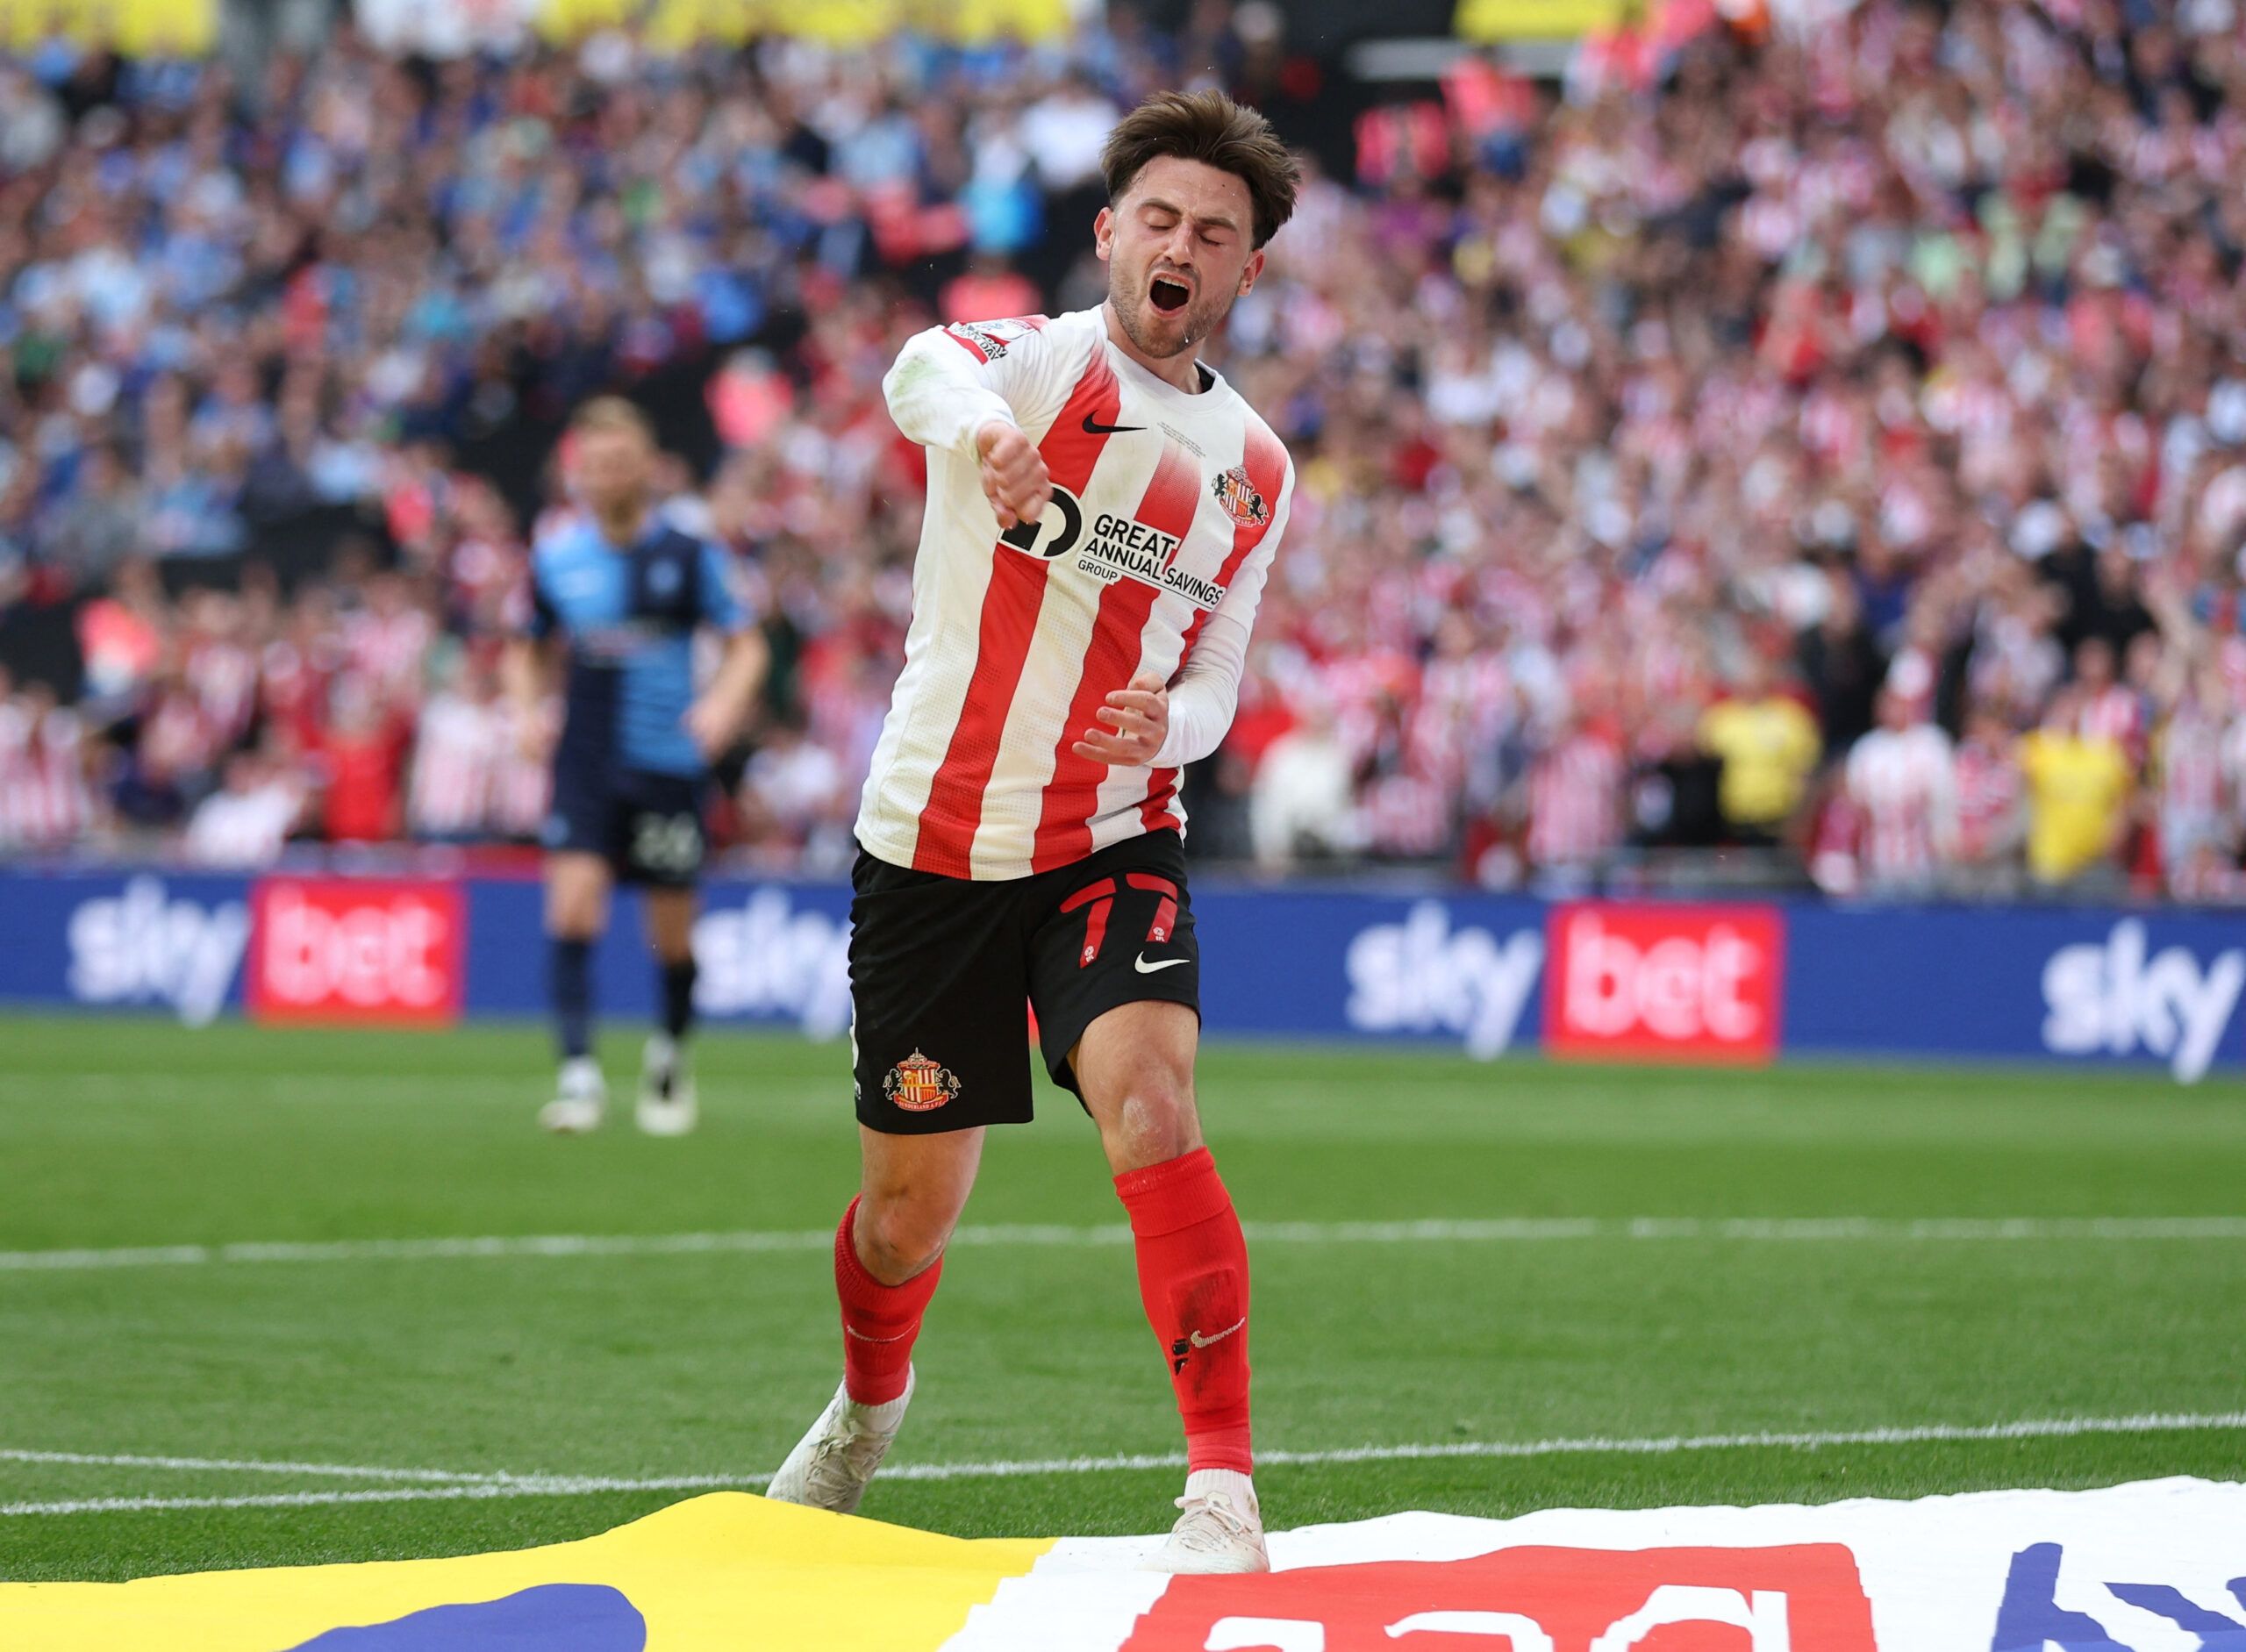 Soccer Football - League One Play-Off Final - Sunderland v Wycombe Wanderers - Wembley Stadium, London, Britain - May 21, 2022  Sunderland's Patrick Roberts reacts after an unsuccessful appeal for a penalty Action Images/Matthew Childs EDITORIAL USE ONLY. No use with unauthorized audio, video, data, fixture lists, club/league logos or 'live' services. Online in-match use limited to 75 images, no video emulation. No use in betting, games or single club /league/player publications.  Please contact